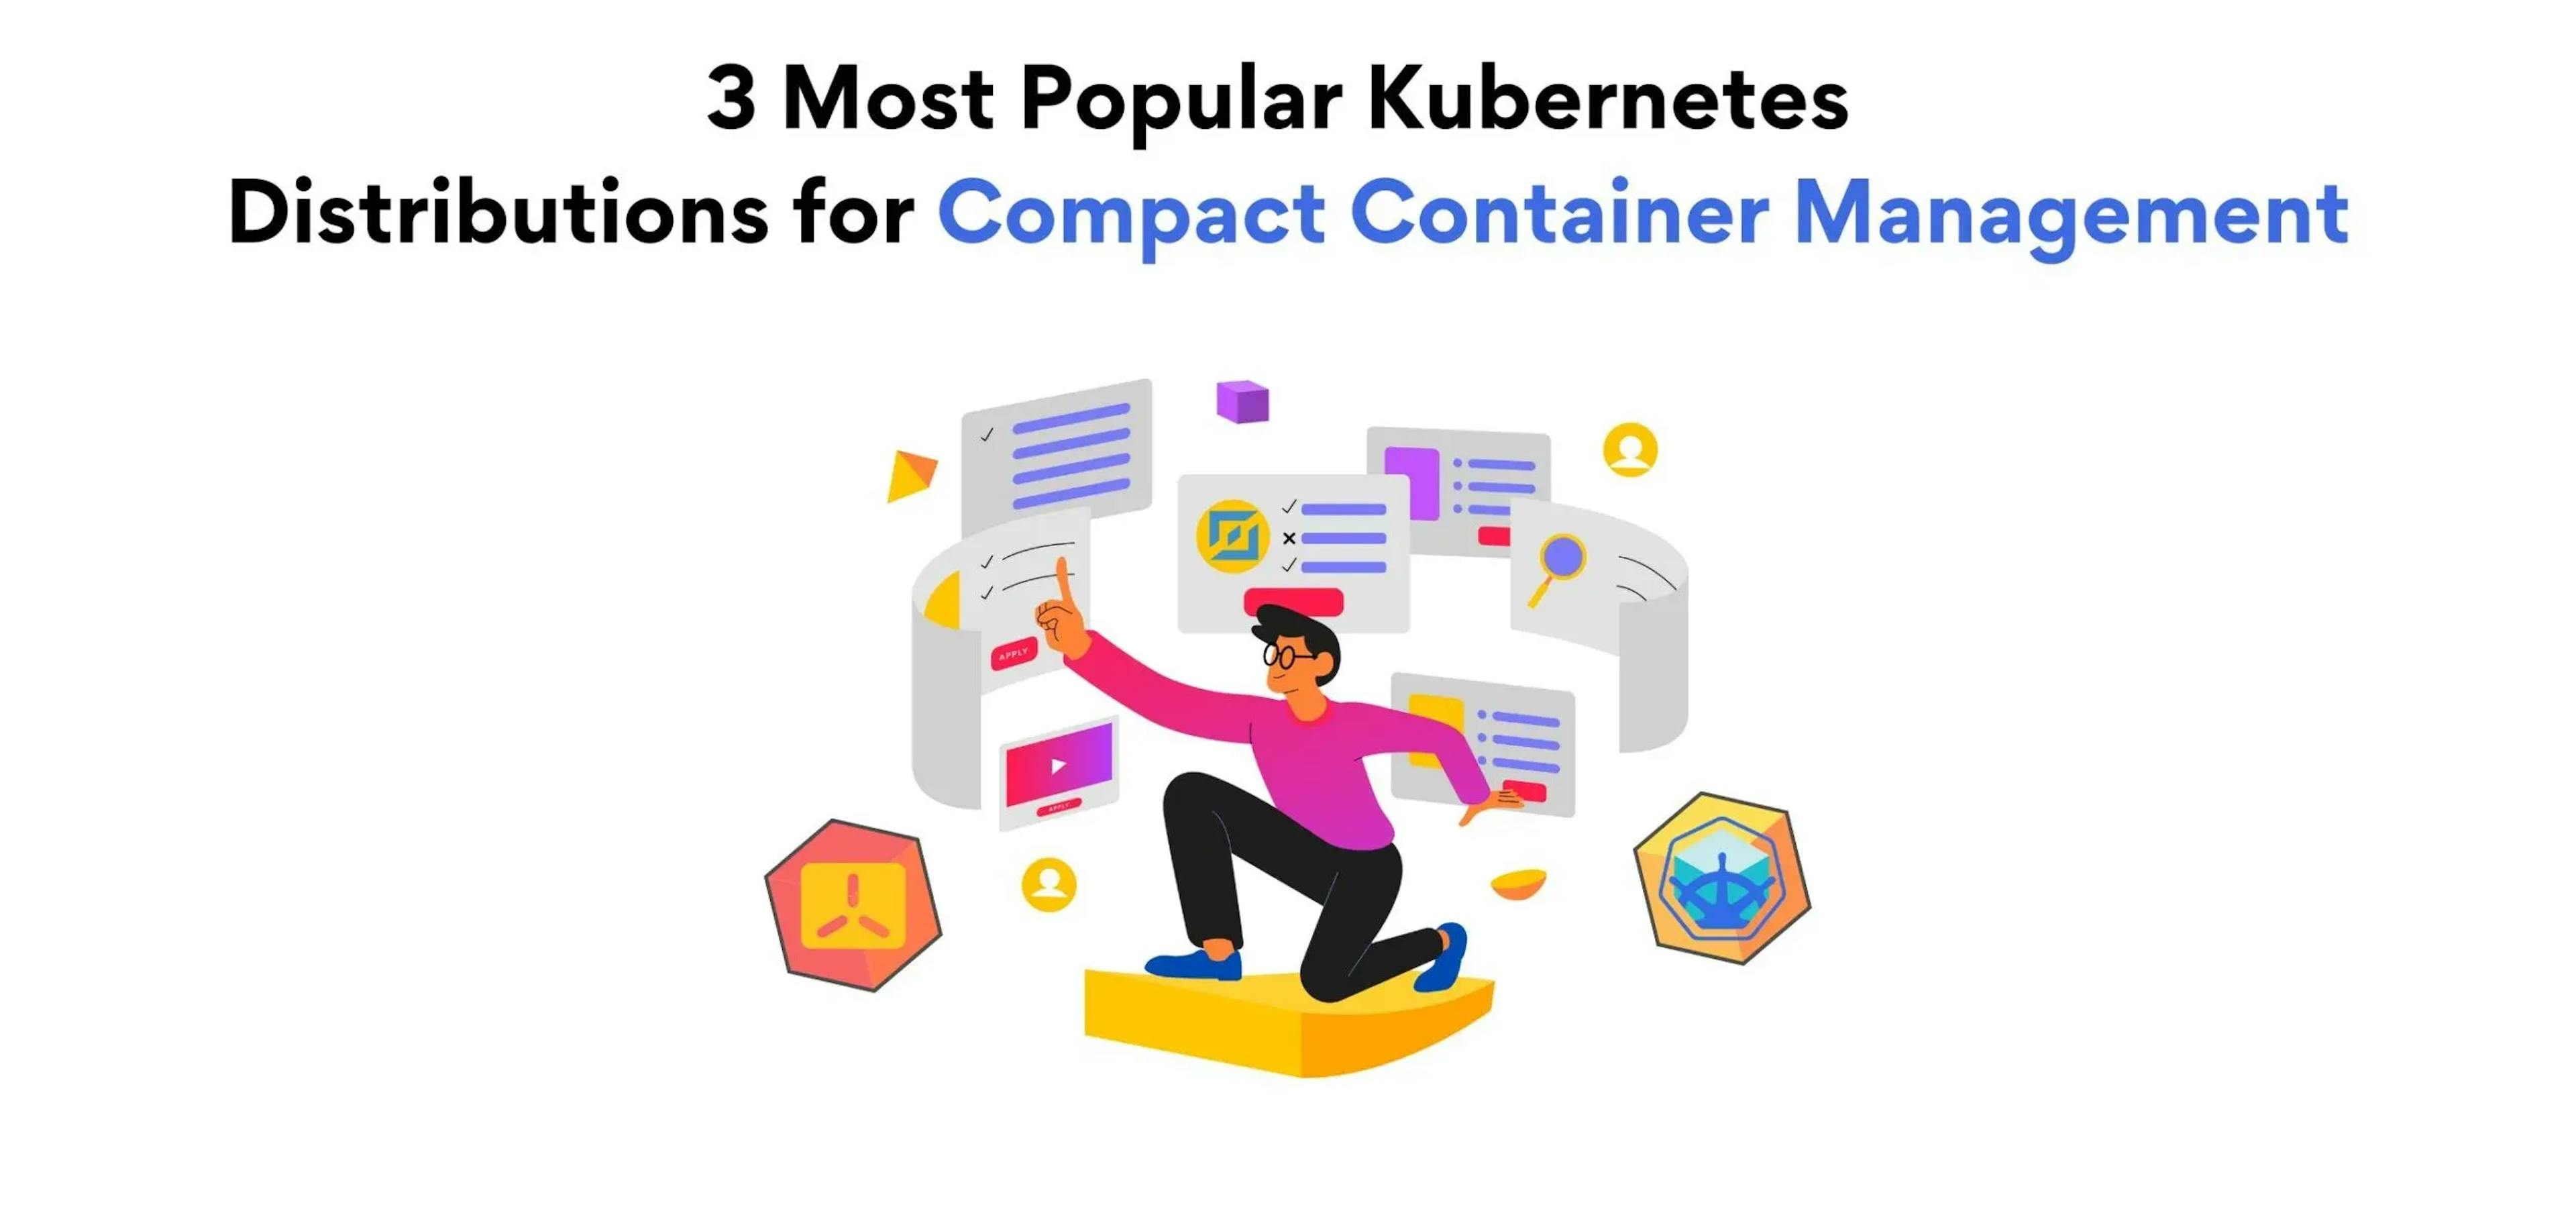 3 Most Popular Kubernetes Distributions for Compact Container Management